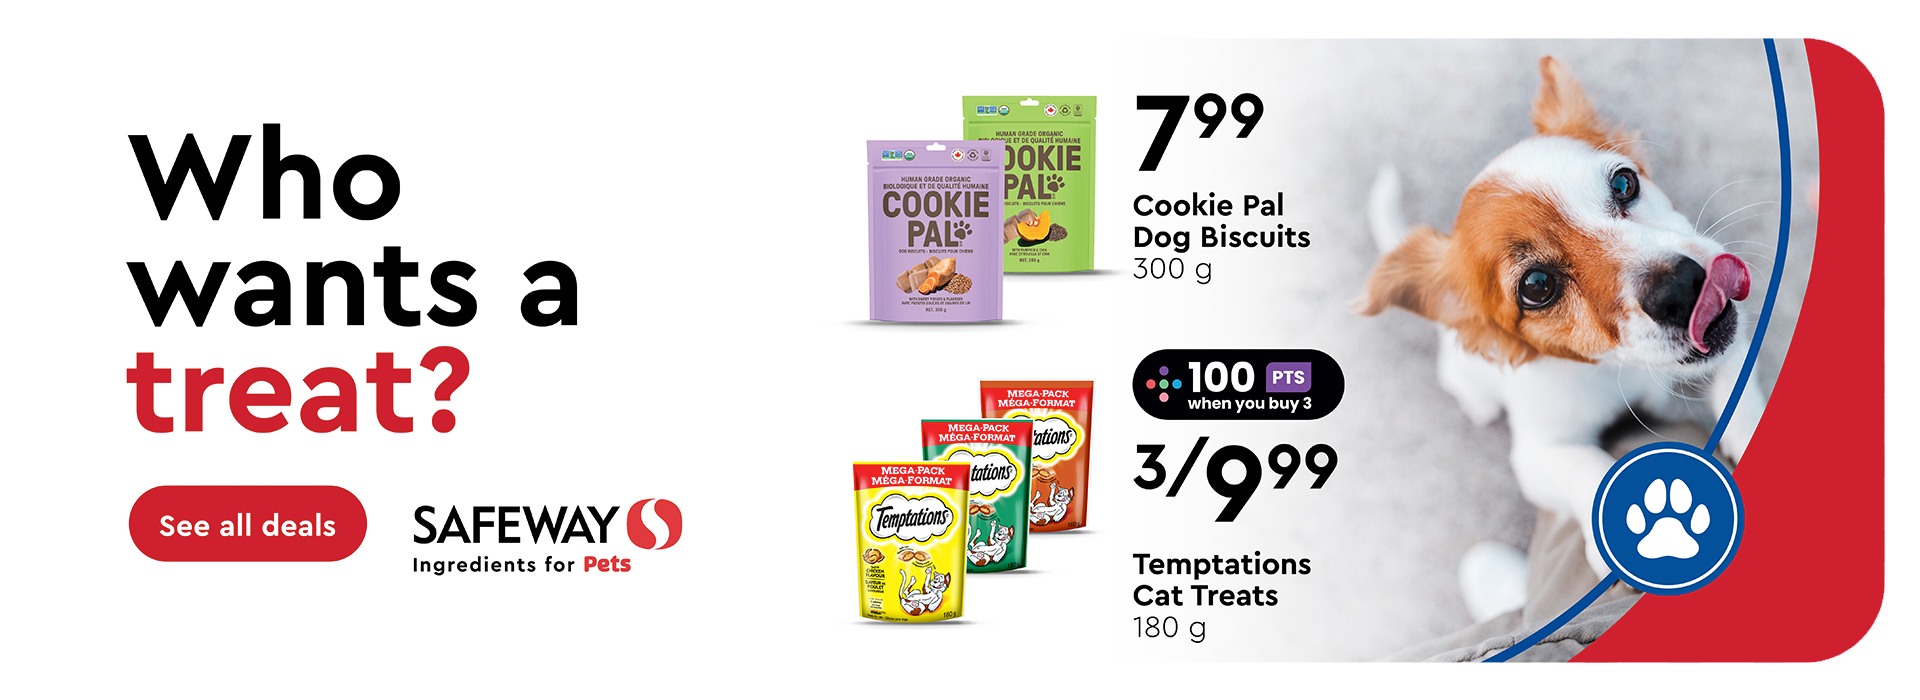 Text Reading 'Who wants a treat? Value Size Temptations Cat treats start at $6.99 for 454 grams, and Pedigree Marrobone Treats start at $12.99 for 1.9 kg. Click on 'See all Deals' button to find more treats.'